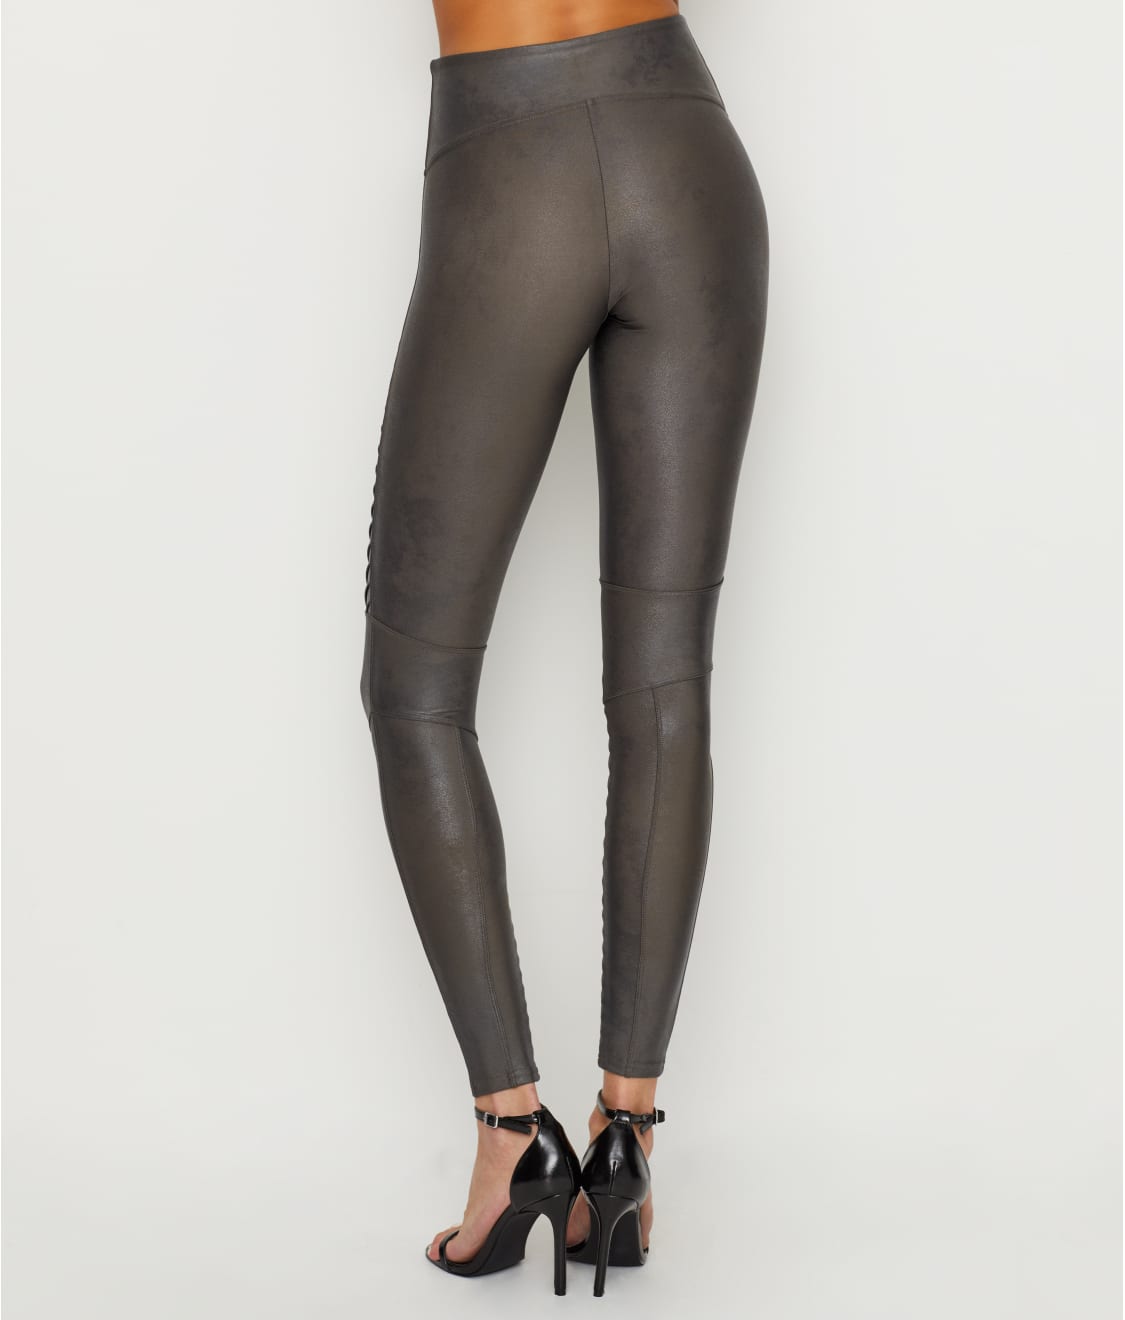 Spanx Faux Leather Leggings Review: 3 Women Try Them Out